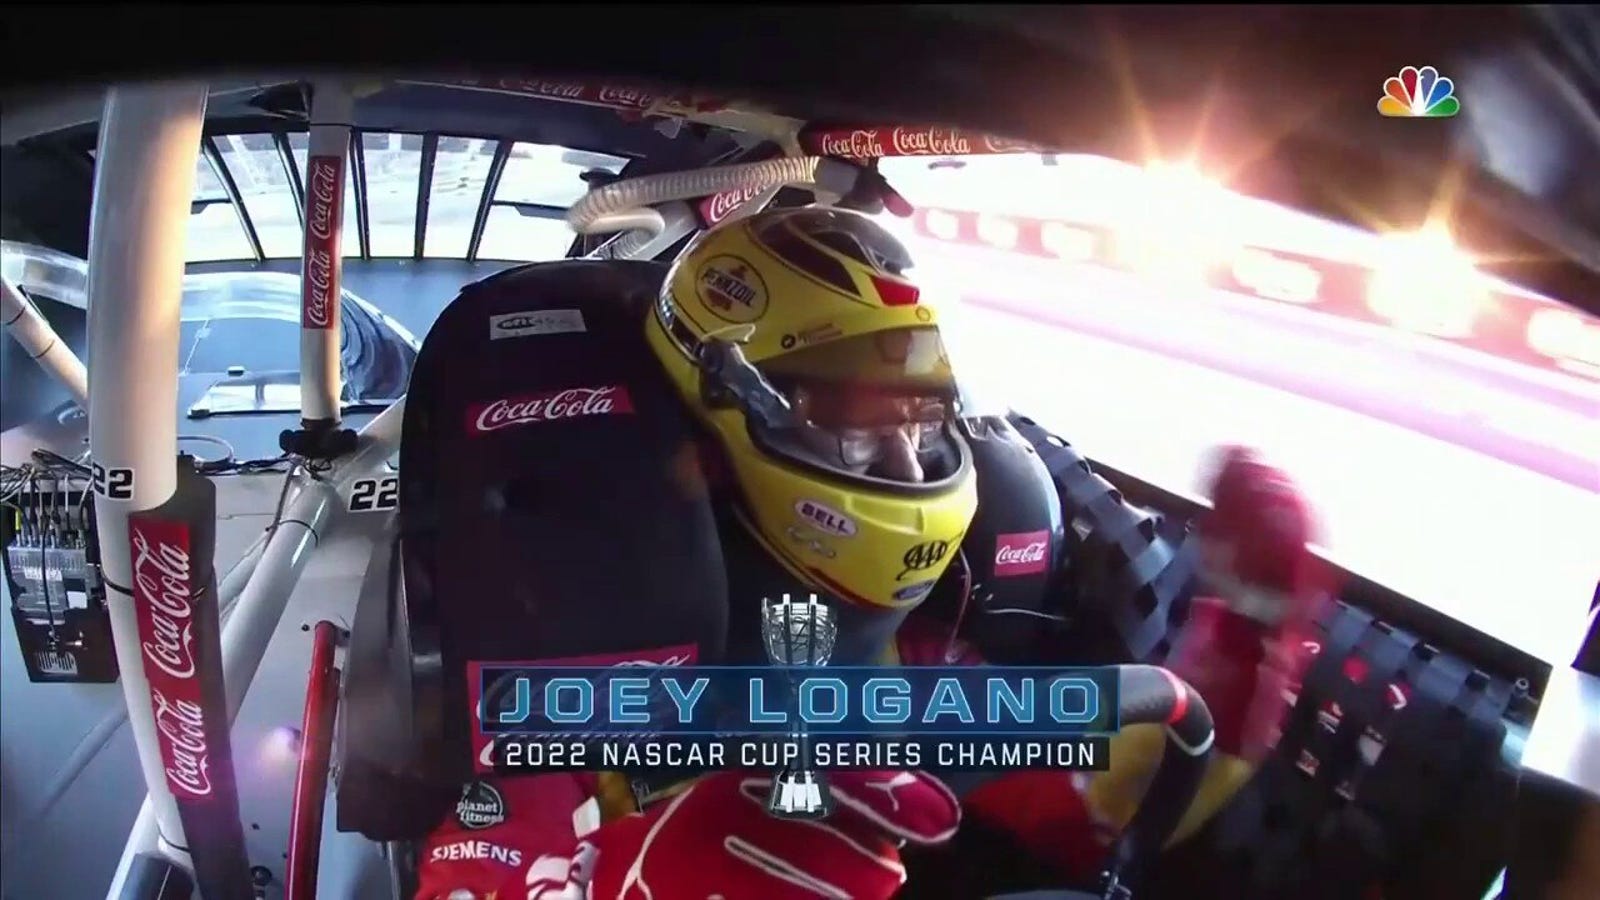 Joey Logano wins the NASCAR Cup Series Championship